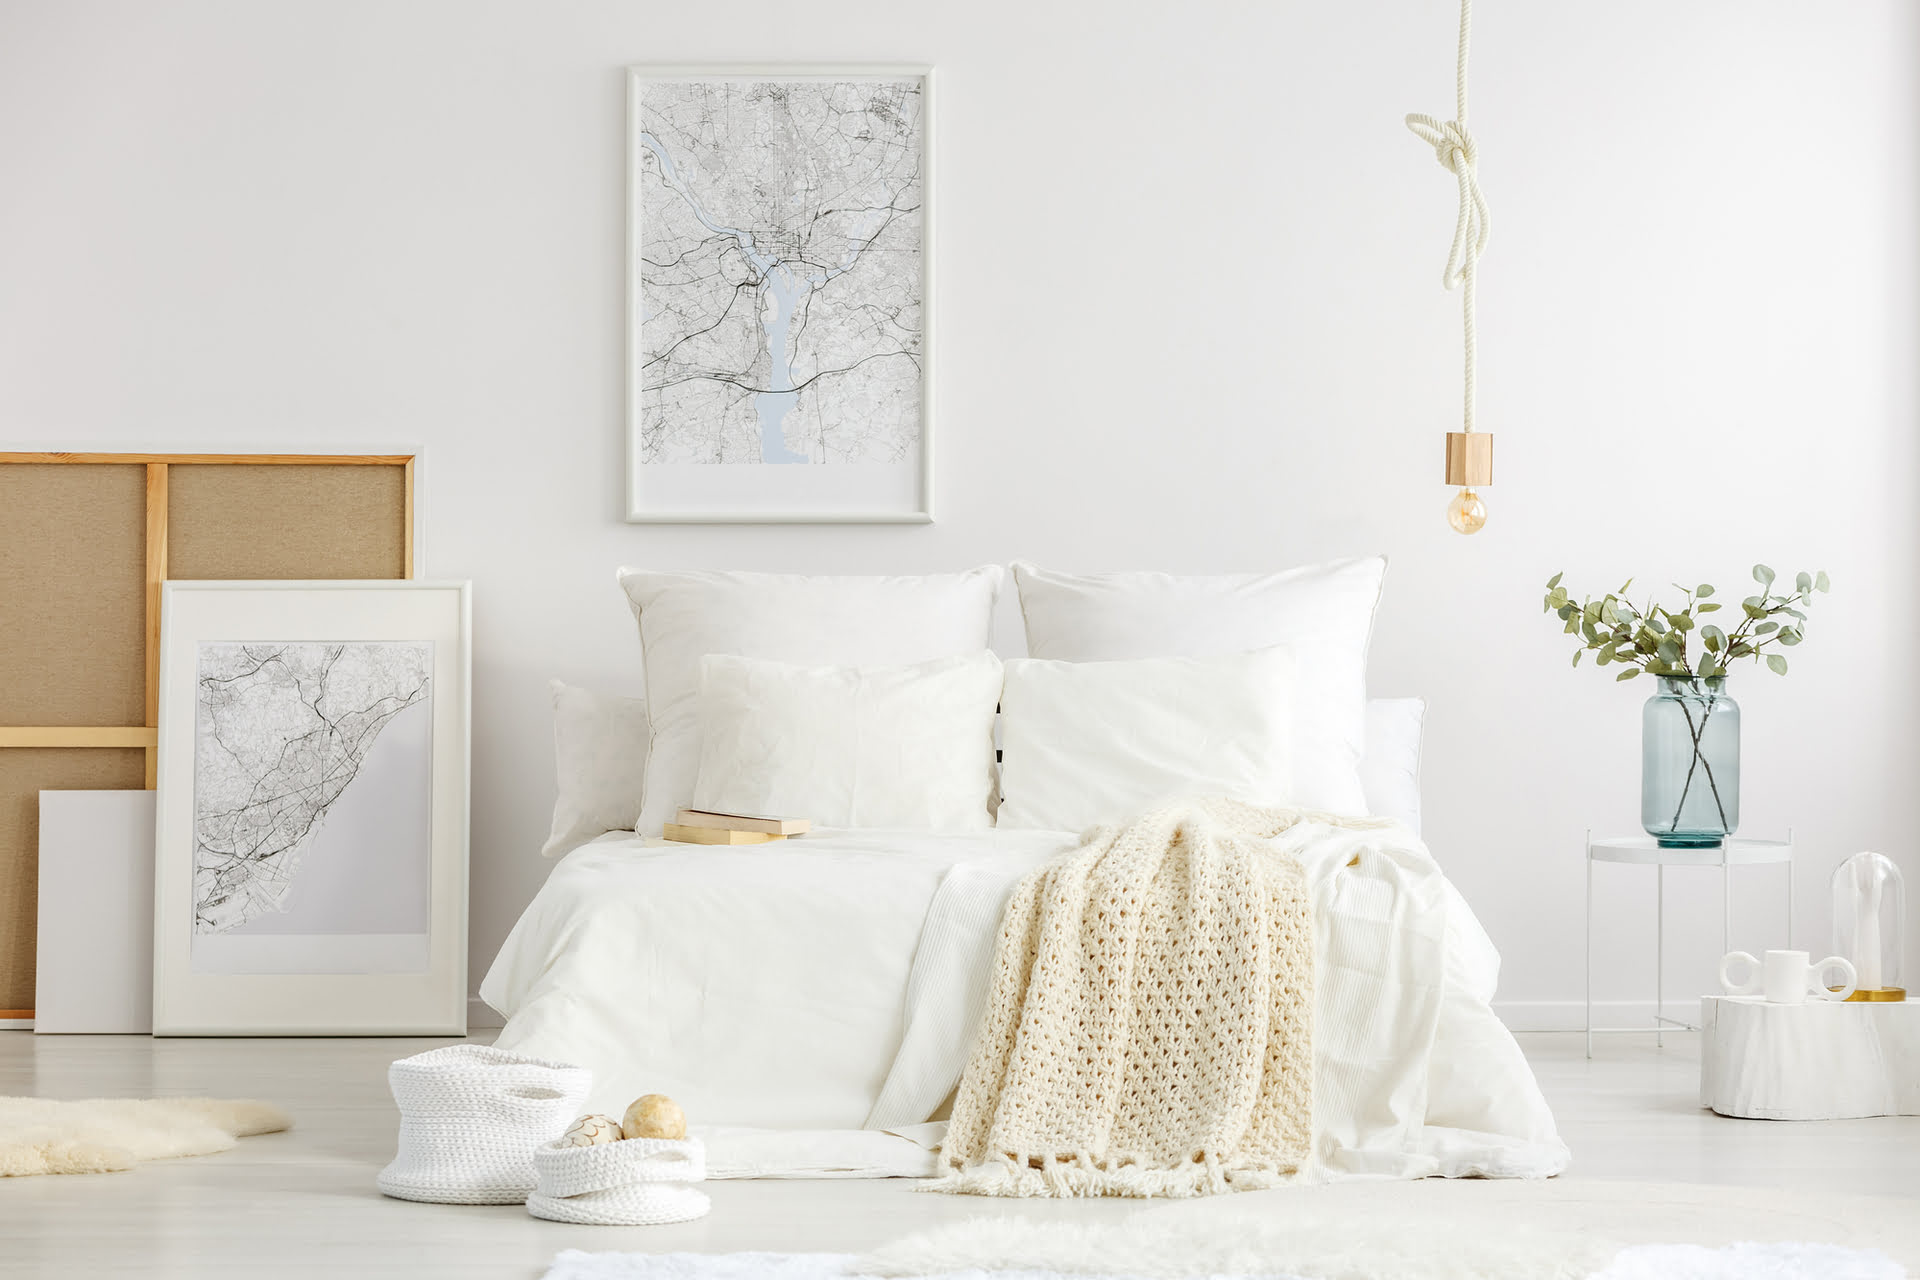 How Should I Arrange My Bedroom For Good Energy? 7 Ways To Positively Energize Your Space